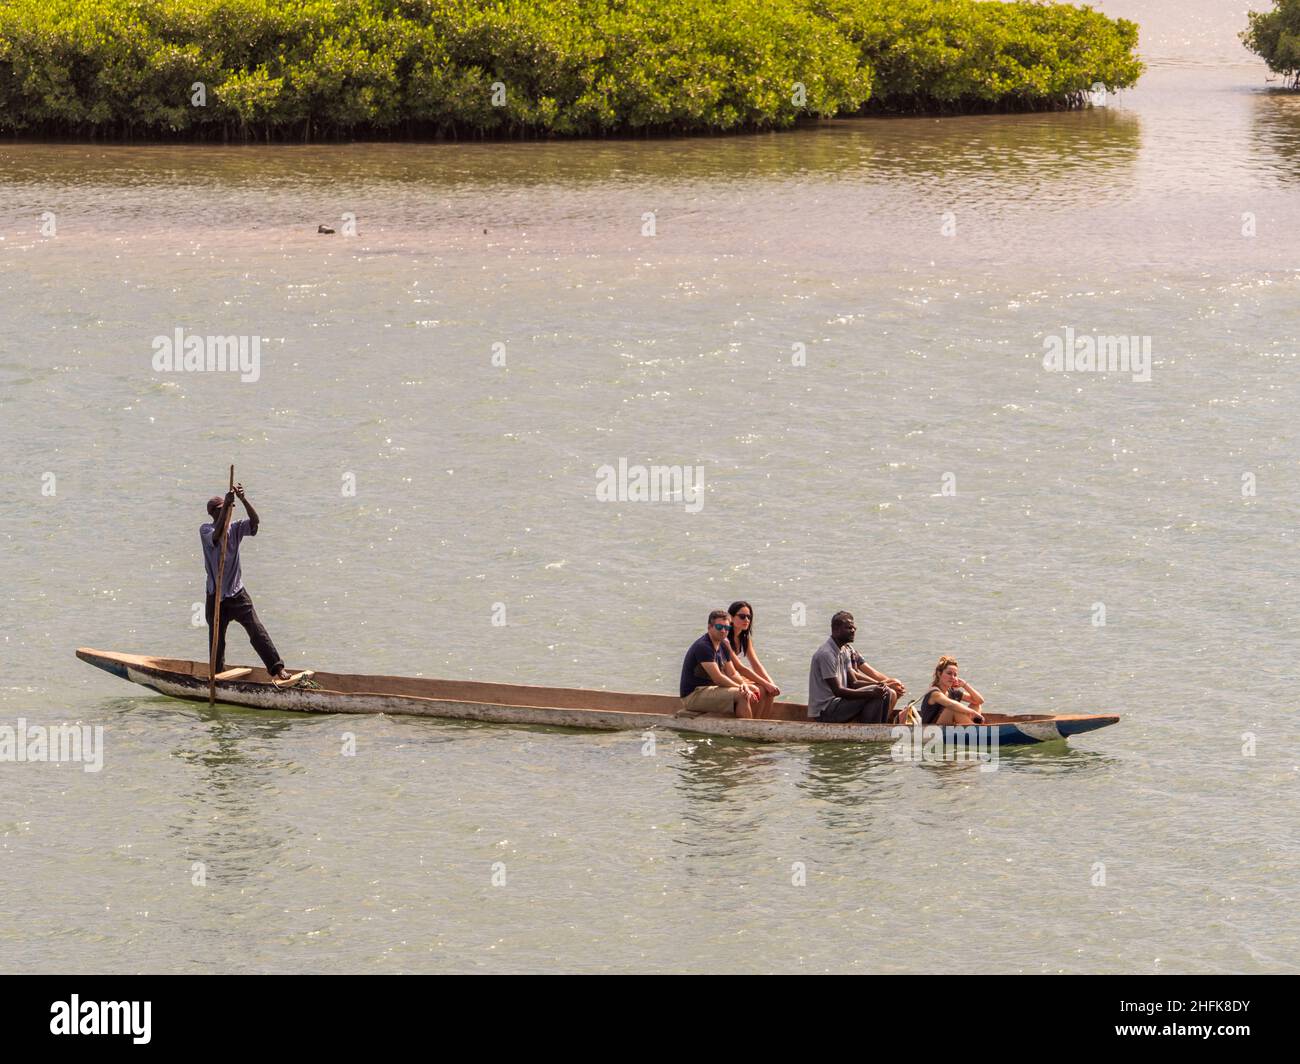 Joal-Fadiouth, Senegal, Africa - Jan 2019: An African man ushes himself off with a pole on a small wooden canoe in the sea between Joel and Fadiouth - Stock Photo